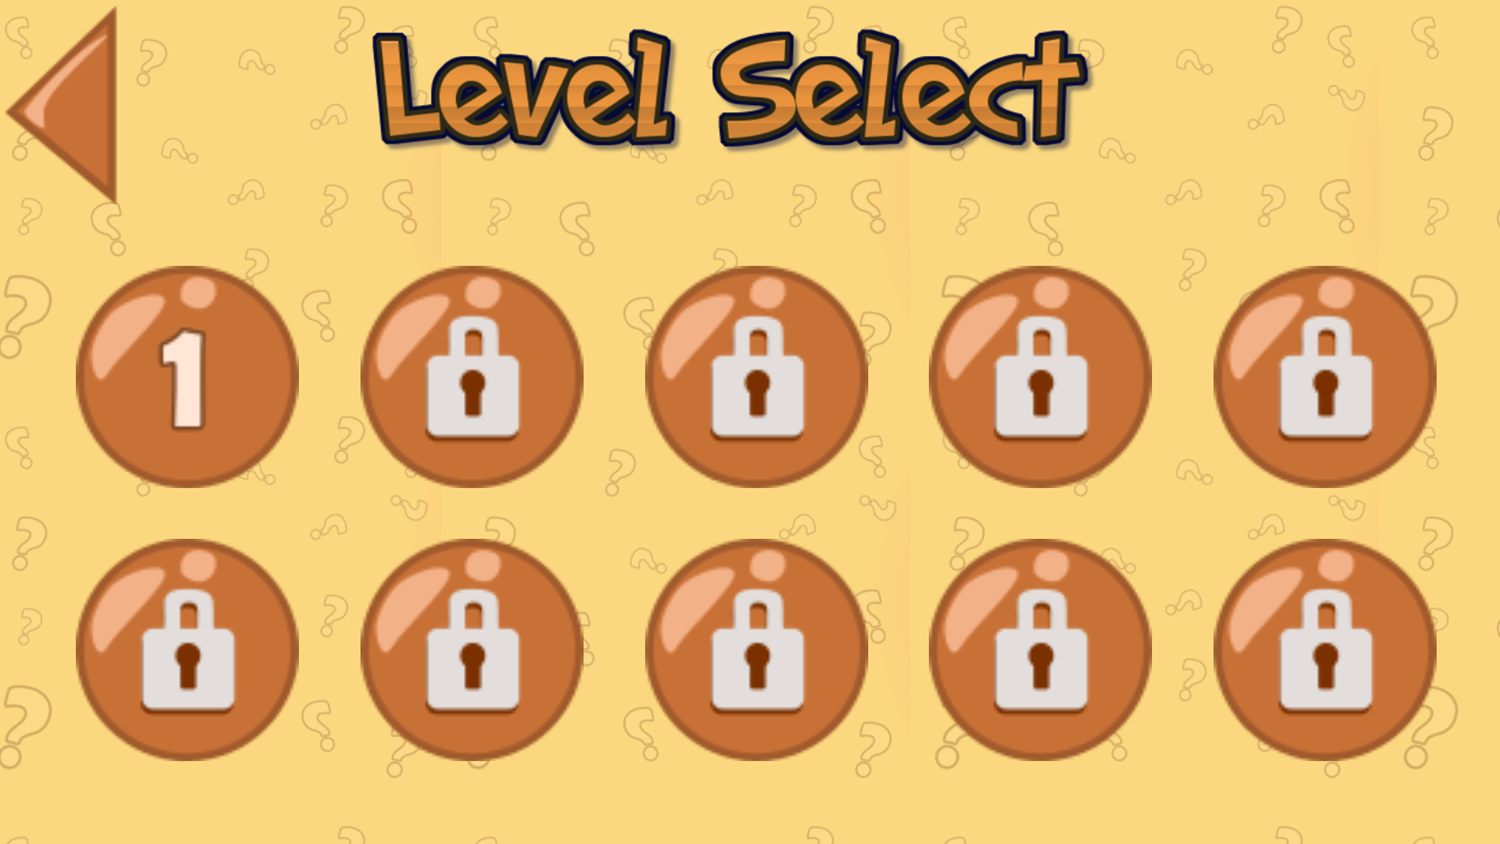 Find Wrong Game Level Select Screenshot.